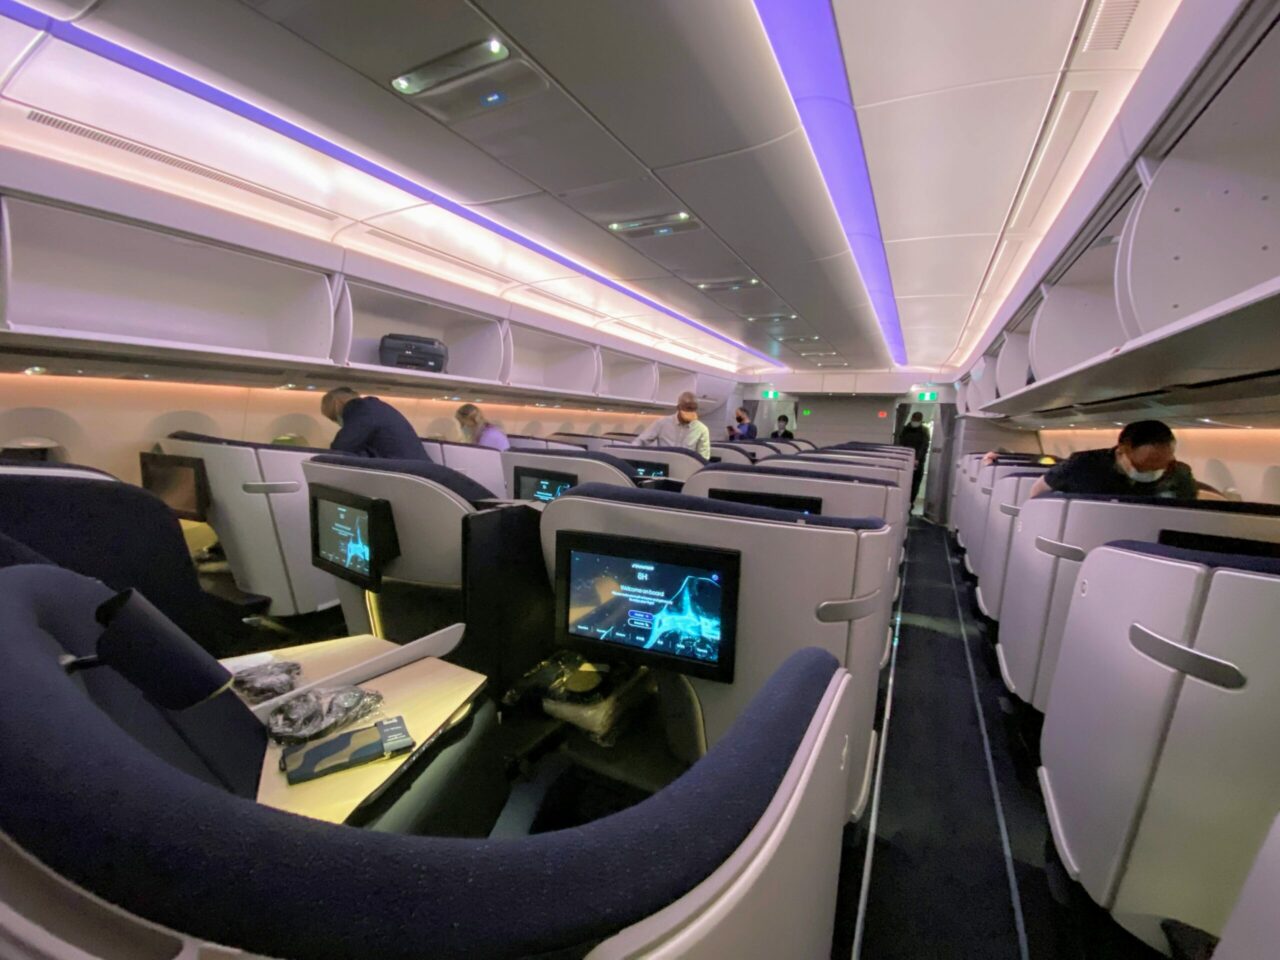 Finnair new A350 business class "AirLounge" non-reclining seats overall look 